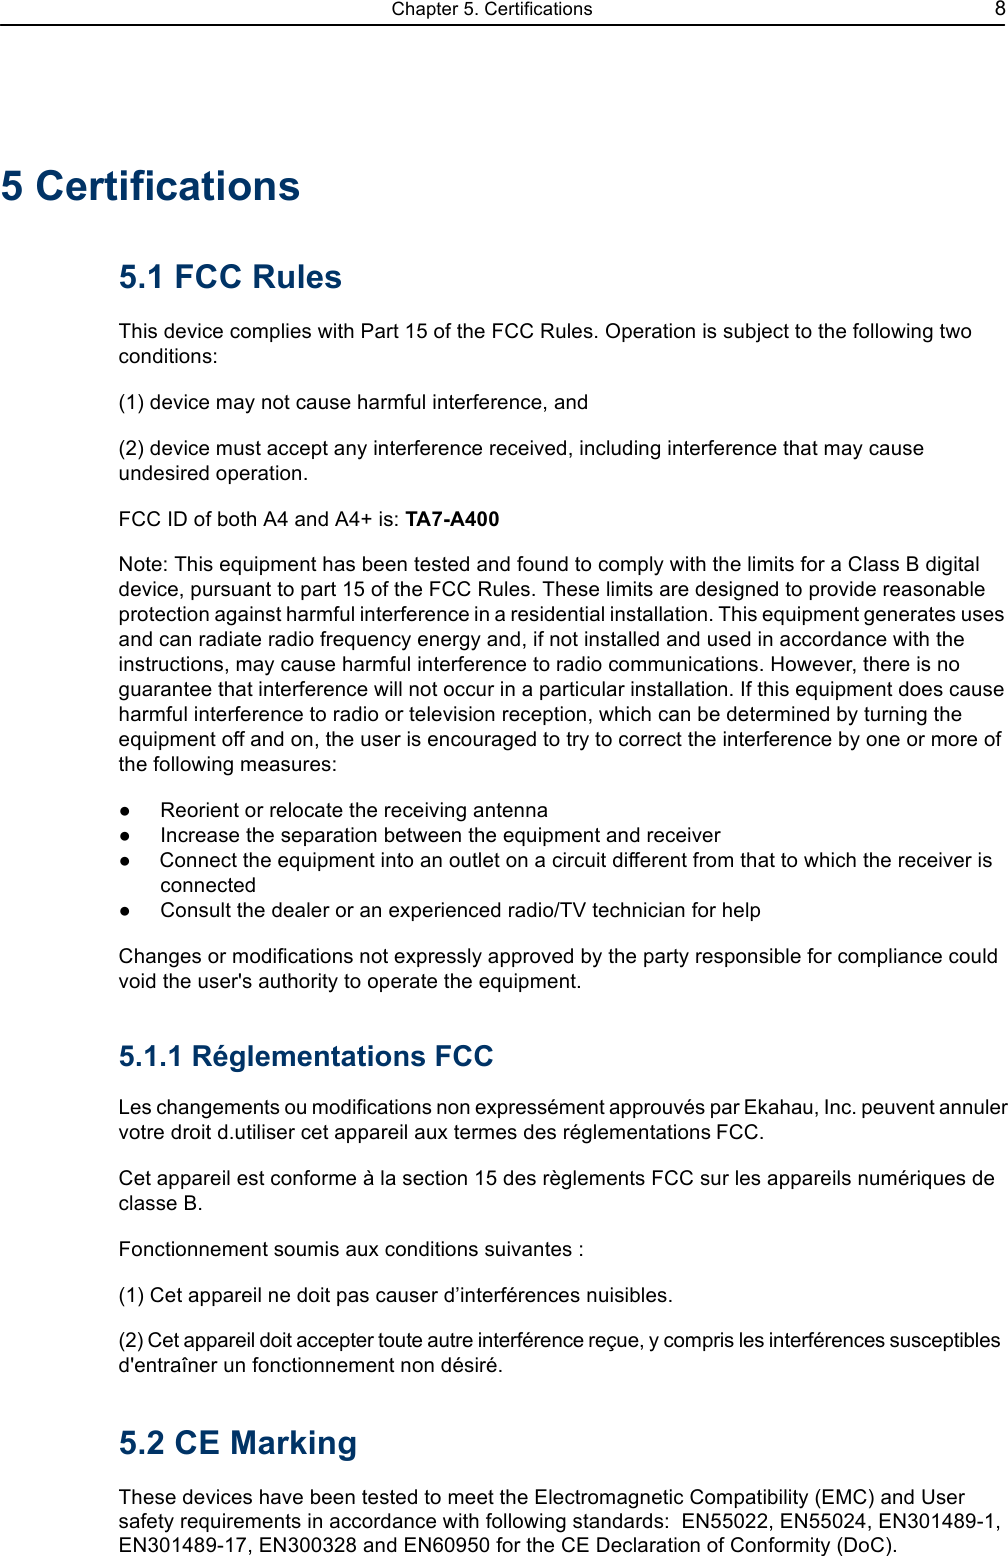 Chapter 5. Certifications 85 Certifications5.1 FCC RulesThis device complies with Part 15 of the FCC Rules. Operation is subject to the following two conditions:(1) device may not cause harmful interference, and(2) device must accept any interference received, including interference that may cause undesired operation.FCC ID of both A4 and A4+ is: TA7-A400Note: This equipment has been tested and found to comply with the limits for a Class B digital device, pursuant to part 15 of the FCC Rules. These limits are designed to provide reasonable protection against harmful interference in a residential installation. This equipment generates uses and can radiate radio frequency energy and, if not installed and used in accordance with the instructions, may cause harmful interference to radio communications. However, there is no guarantee that interference will not occur in a particular installation. If this equipment does cause harmful interference to radio or television reception, which can be determined by turning the equipment off and on, the user is encouraged to try to correct the interference by one or more of the following measures:Reorient or relocate the receiving antennaIncrease the separation between the equipment and receiverConnect the equipment into an outlet on a circuit different from that to which the receiver is connectedConsult the dealer or an experienced radio/TV technician for helpChanges or modifications not expressly approved by the party responsible for compliance could void the user&apos;s authority to operate the equipment.5.1.1 Réglementations FCCLes changements ou modifications non expressément approuvés par Ekahau, Inc. peuvent annuler votre droit d.utiliser cet appareil aux termes des réglementations FCC.Cet appareil est conforme à la section 15 des règlements FCC sur les appareils numériques de classe B.Fonctionnement soumis aux conditions suivantes :(1) Cet appareil ne doit pas causer dinterférences nuisibles.(2) Cet appareil doit accepter toute autre interférence reçue, y compris les interférences susceptibles d&apos;entraîner un fonctionnement non désiré.5.2 CE MarkingThese devices have been tested to meet the Electromagnetic Compatibility (EMC) and User safety requirements in accordance with following standards:  EN55022, EN55024, EN301489-1, EN301489-17, EN300328 and EN60950 for the CE Declaration of Conformity (DoC).